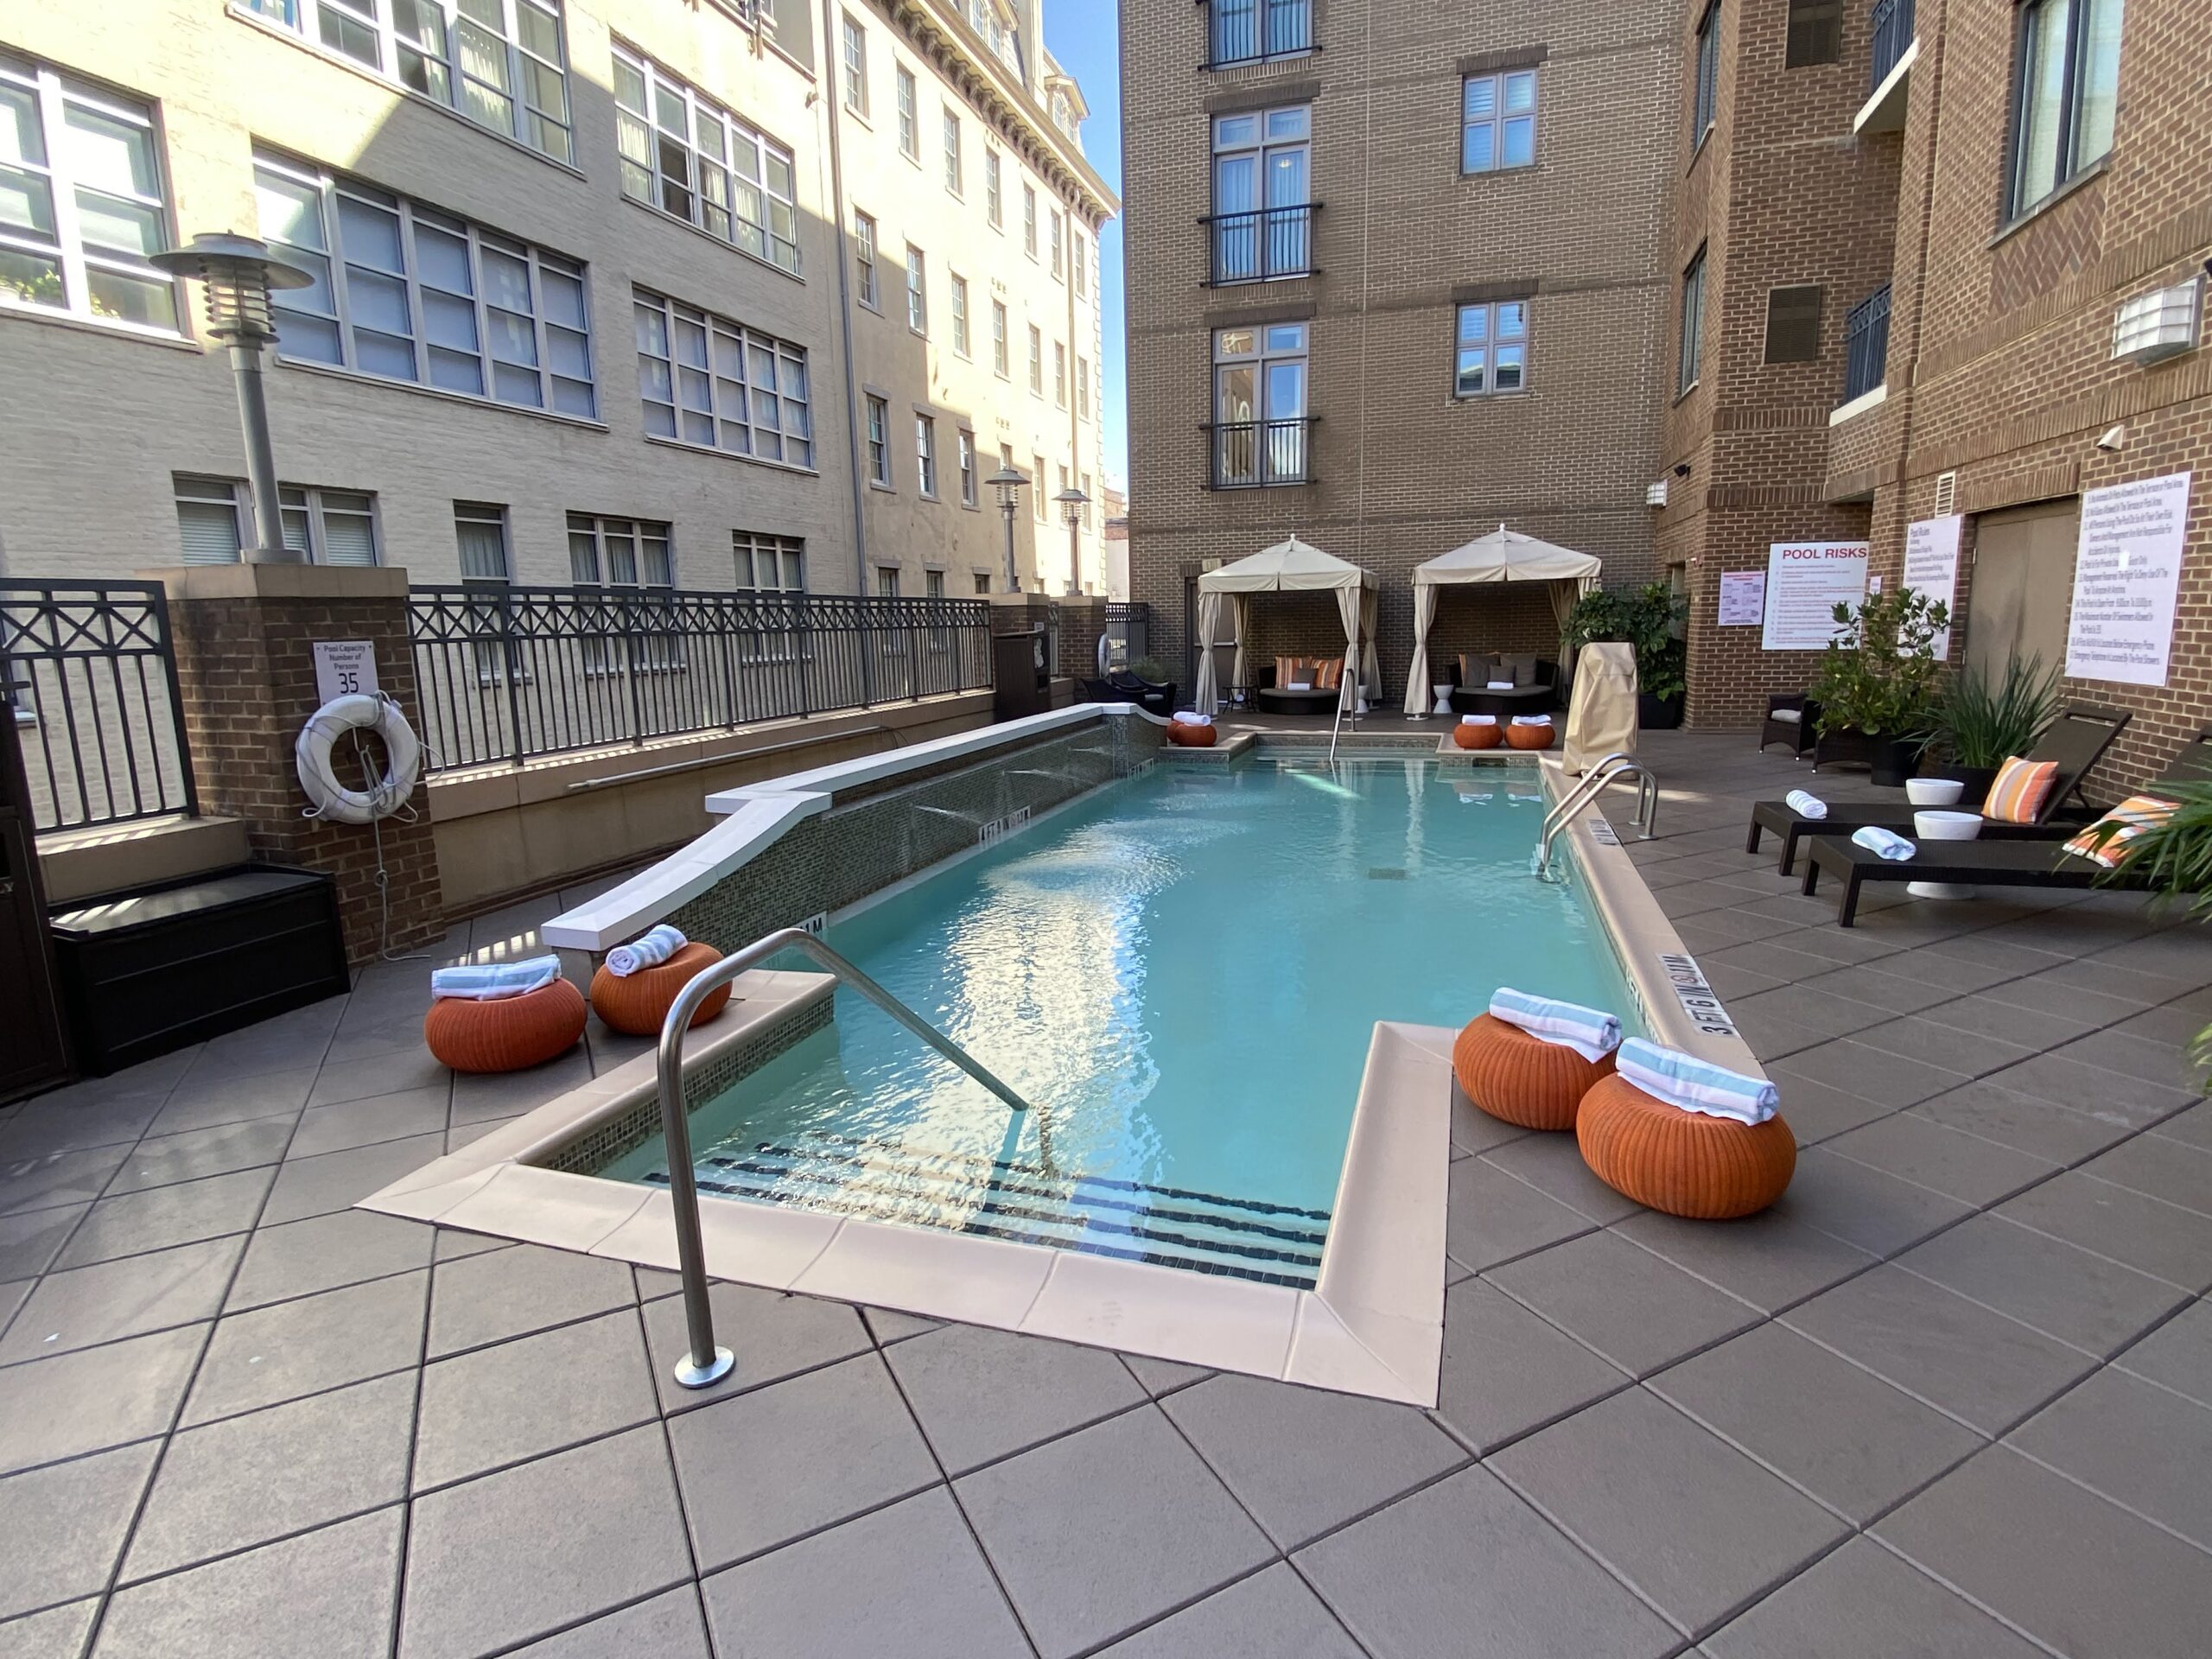 a pool with a railing and chairs in front of a building